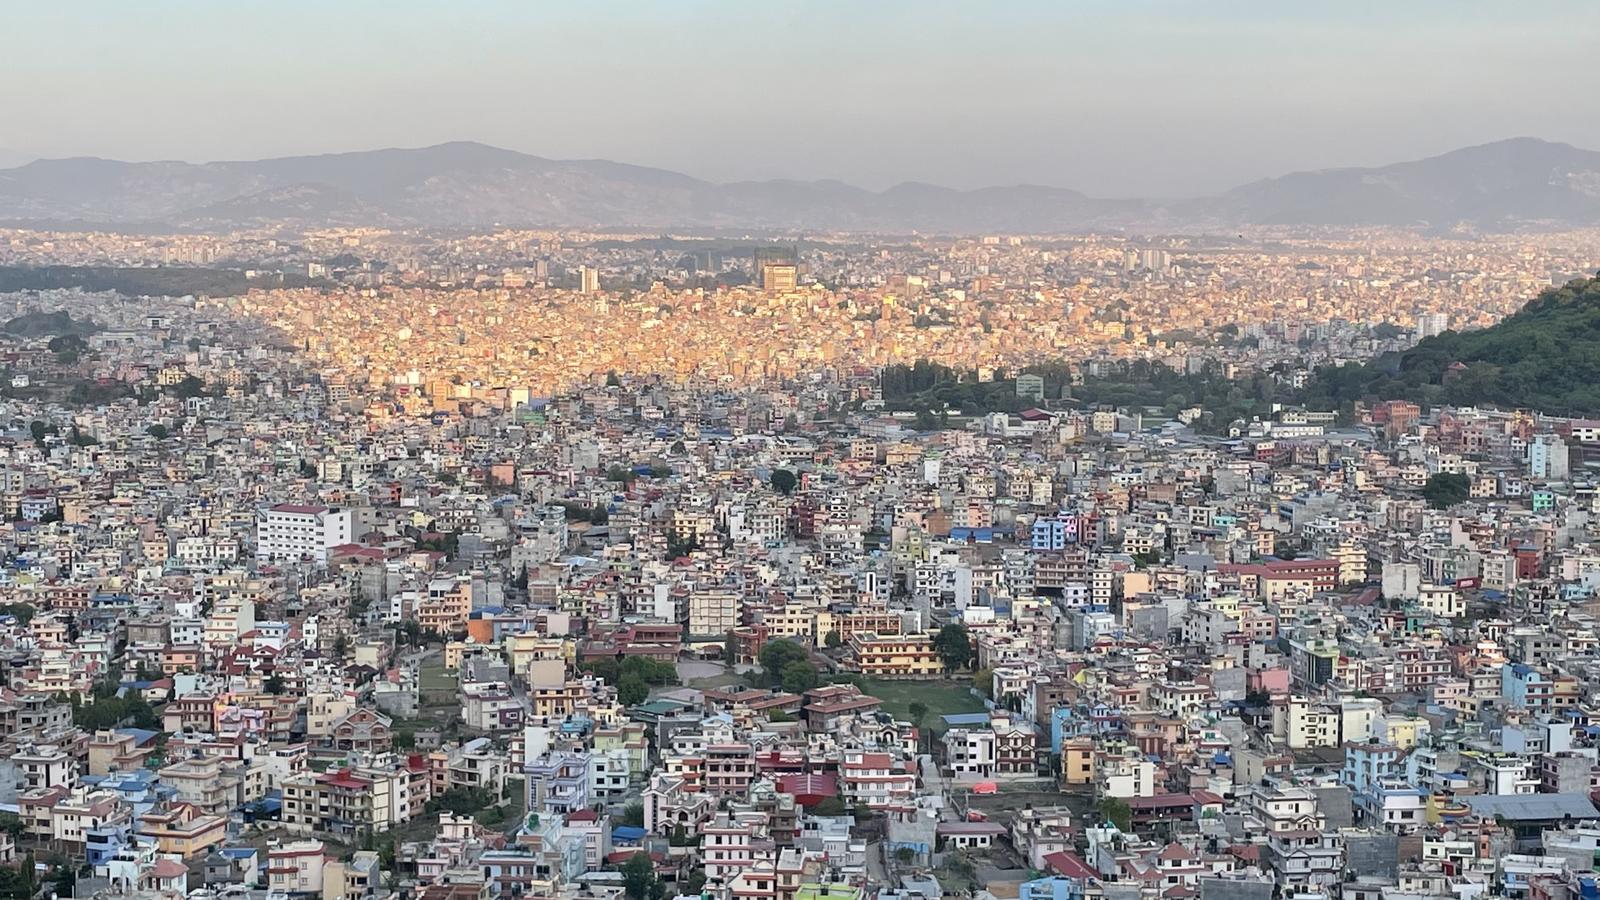 Can You Pass This Geography Quiz Where Every Question Comes With a 🐶 Dog-Related Clue? Kathmandu